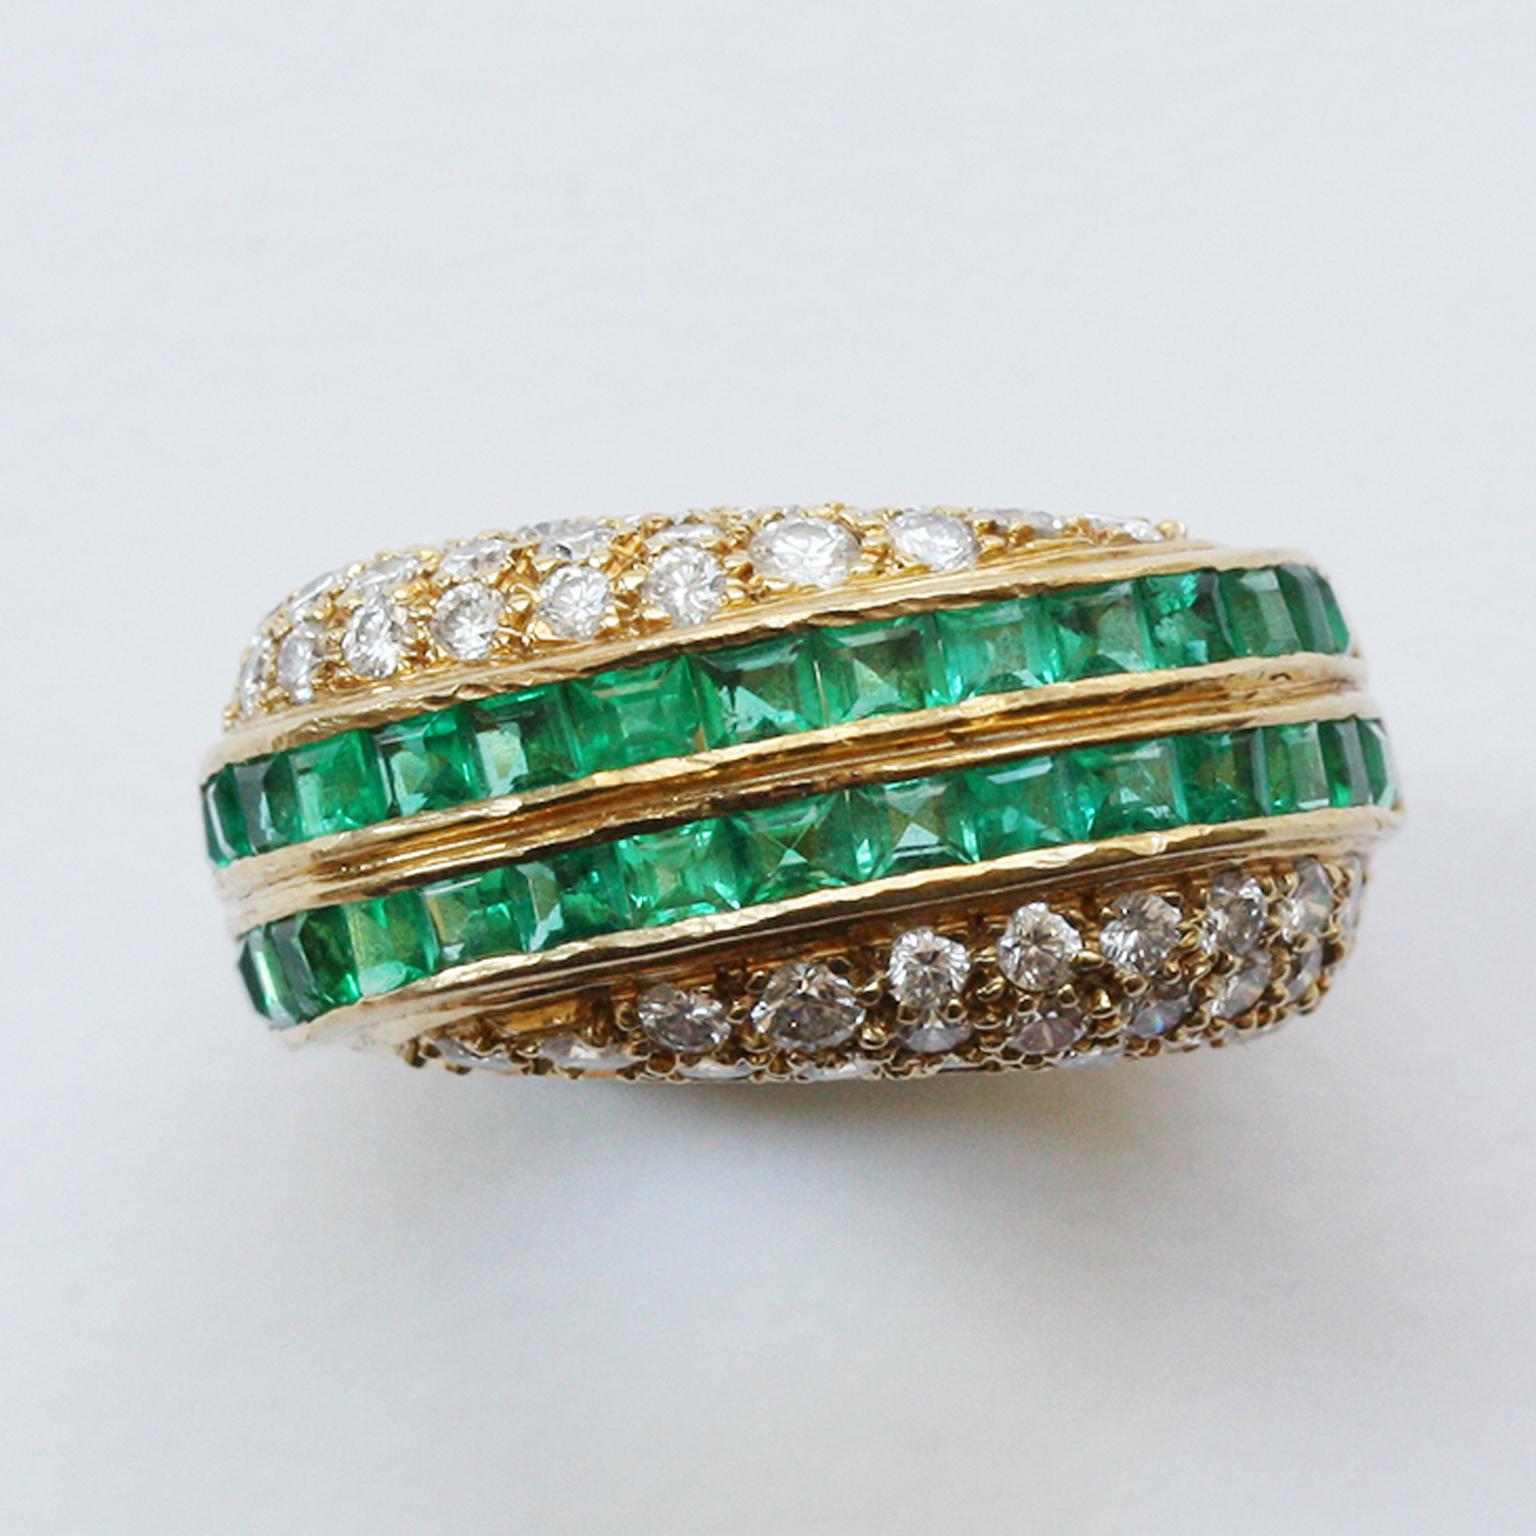 An 18 carat gold ring with two diagonal gold bands set with carré cut  emeralds (app. 1.92 carats with on each side of the lines brilliant cut diamonds in different sizes (app. 1.3 carat in total), signed: David Morris, England.

ring size: 16.25